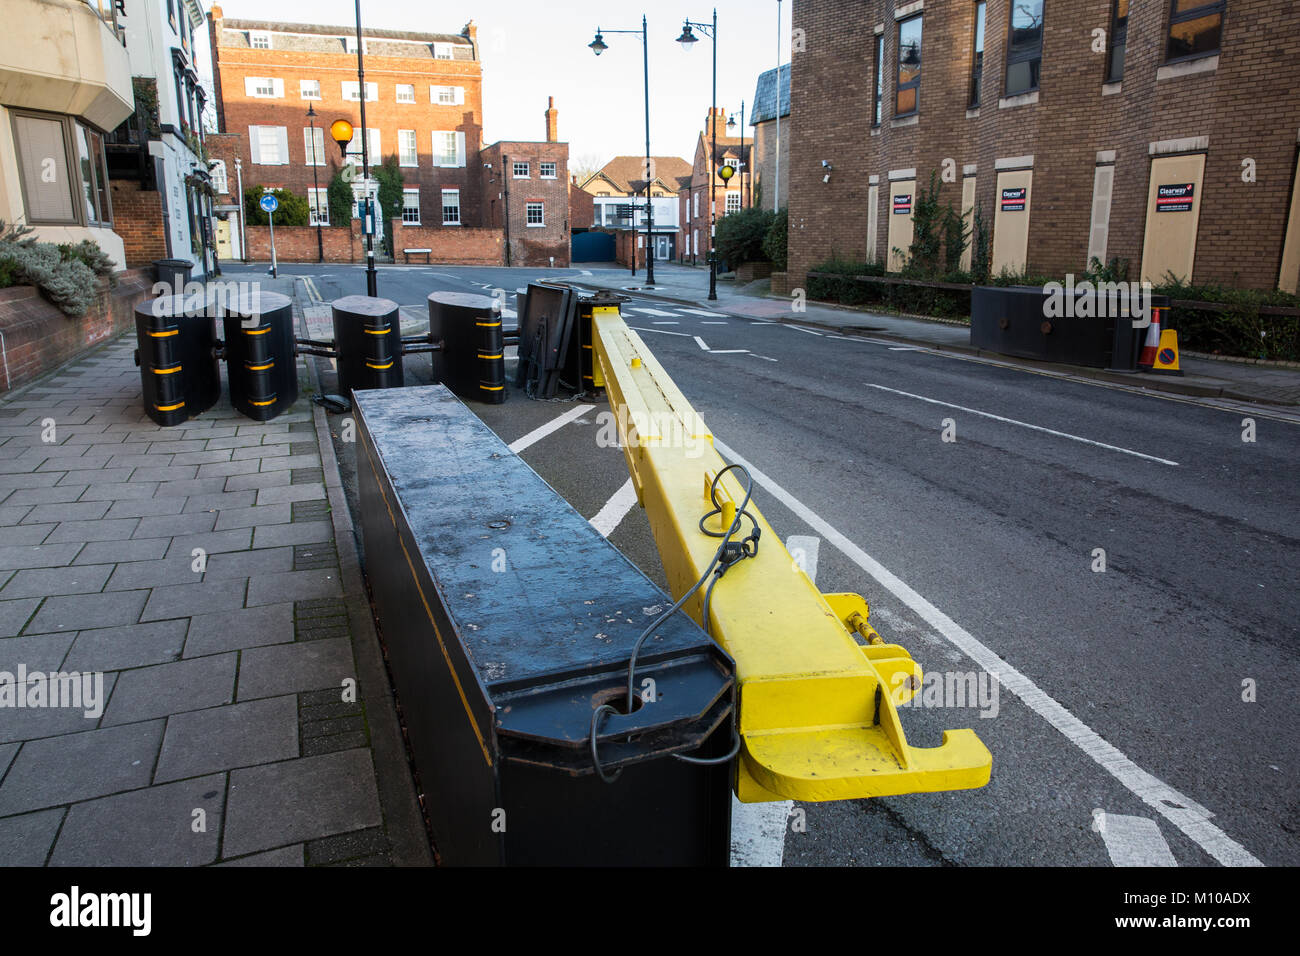 Windsor, UK. 25th January, 2018. Current antiterrorism security measures in place around Windsor town centre include temporary barriers used for events such as the Changing of the Guard ceremony at Windsor Castle. The Royal Borough of Windsor and Maidenhead has now earmarked £2.4 million for ‘hostile vehicle mitigation’ and £1.3 million for CCTV upgrades within its 2018/19 budget. Credit: Mark Kerrison/Alamy Live News Stock Photo